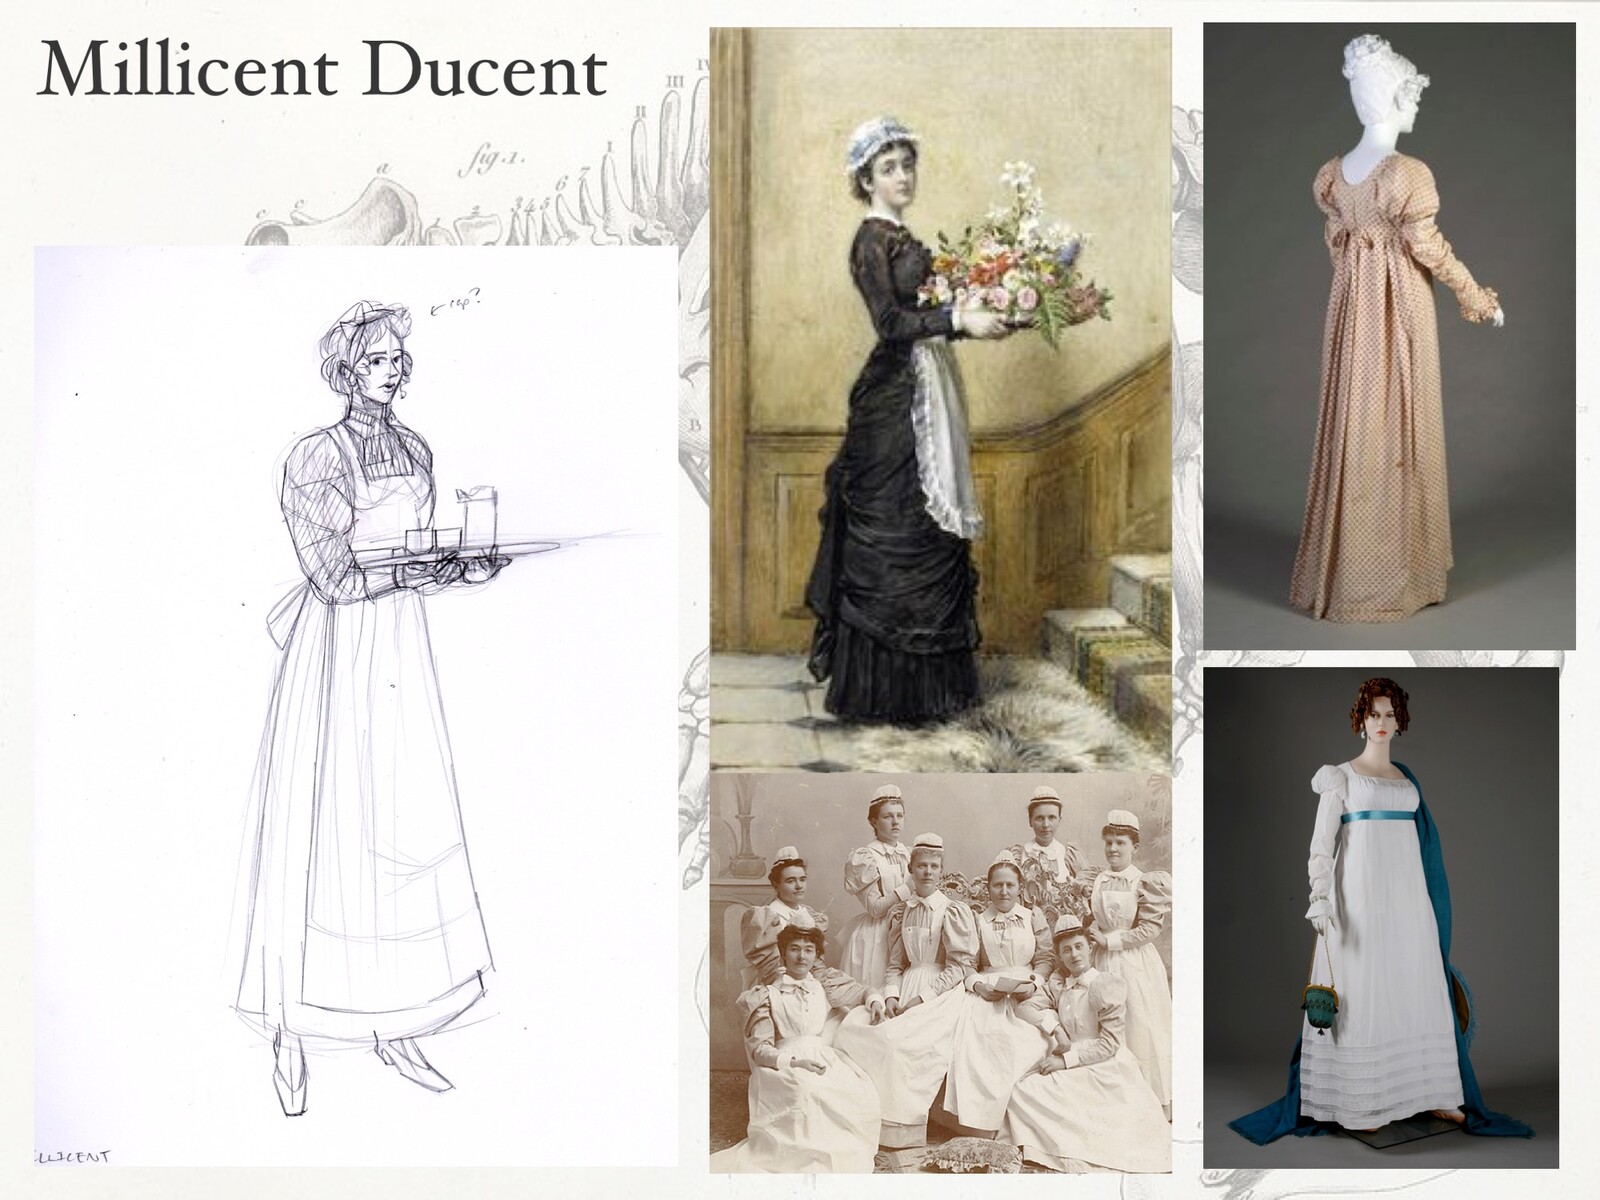 Millicent Ducent: reference. Her dress didn't actually exist in historical record; it had to be a combination of a nurses' uniform, a Victorian maid's dress, and have high waist of a 1810's gown. 